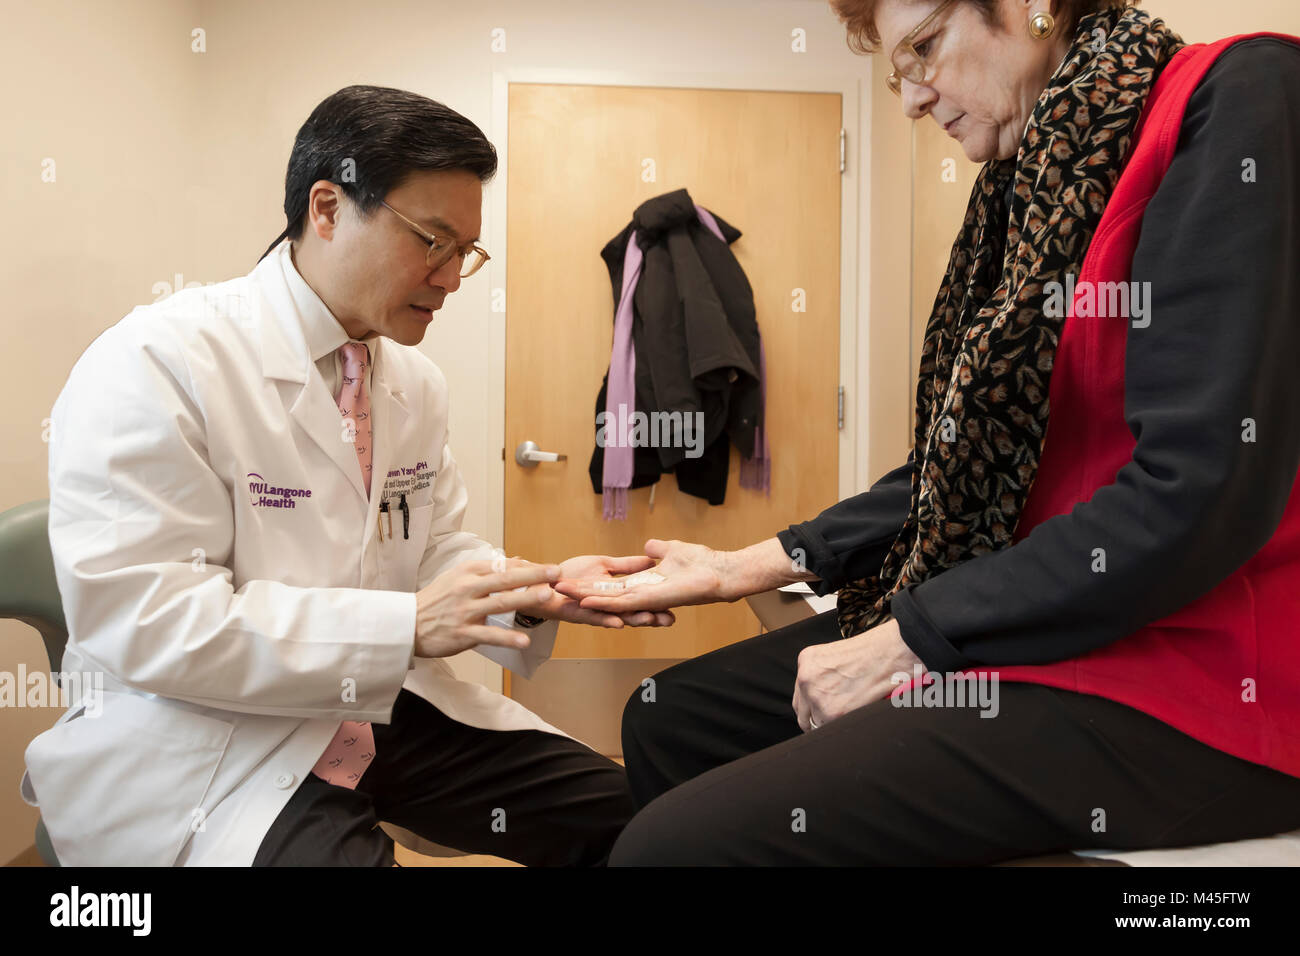 Orthopedic surgeon examining a patient's hand after Dupuytren's contracture surgery on her finger and palm. Stock Photo